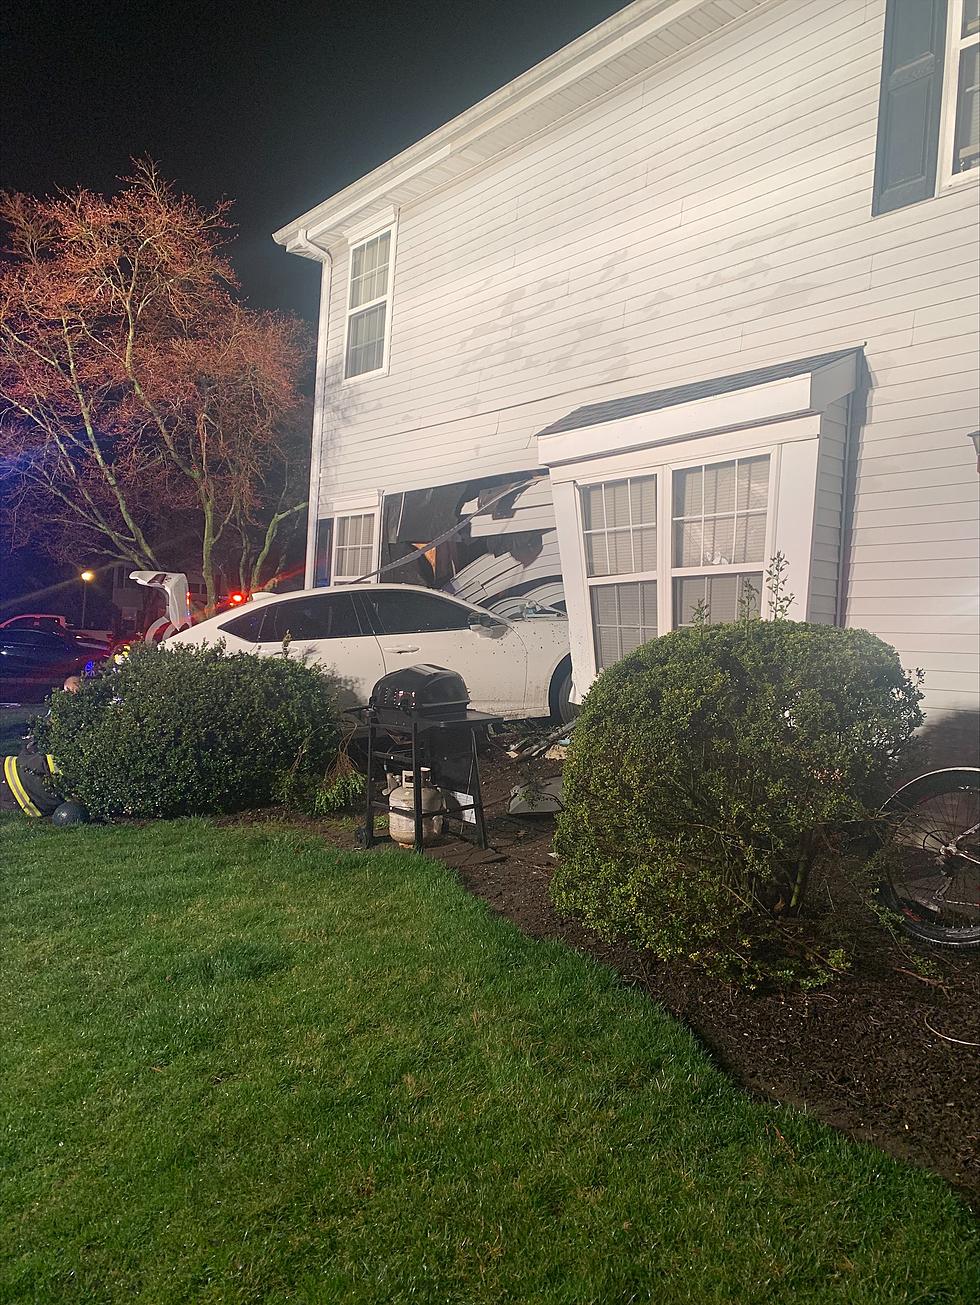 Morganville woman charged with DWI after crashing into a house